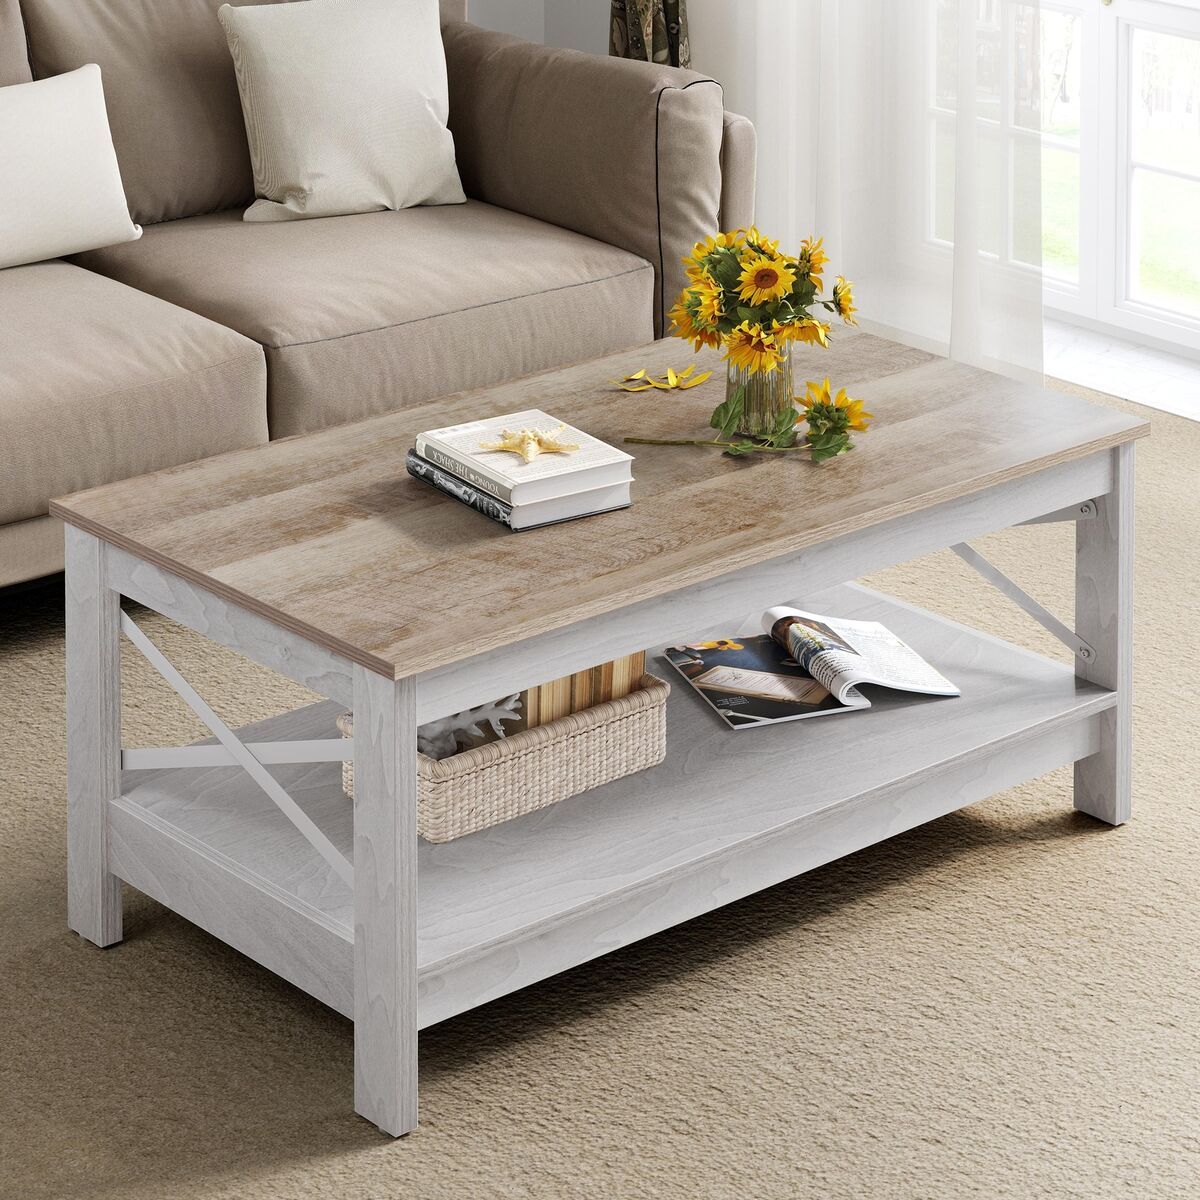 Farmhouse Coffee Table With Storage 2 Tier Center Cocktail Table Living Room  | Ebay With Living Room Farmhouse Coffee Tables (View 8 of 15)